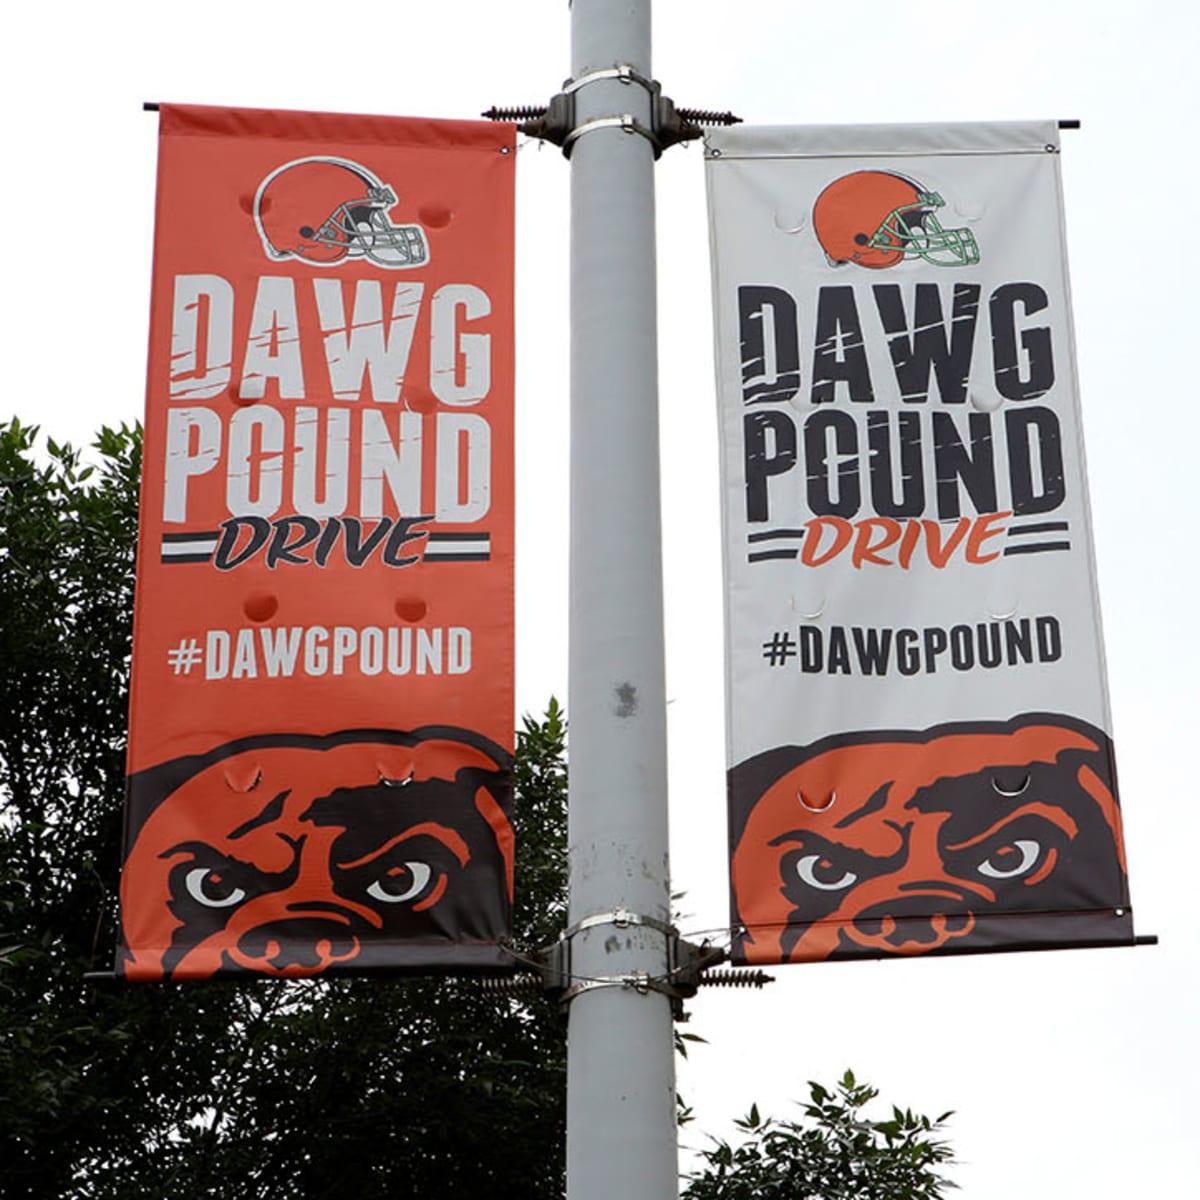 Dawg Pound Porno - Browns dysfunction on full display during alleged porn broadcast - Sports  Illustrated